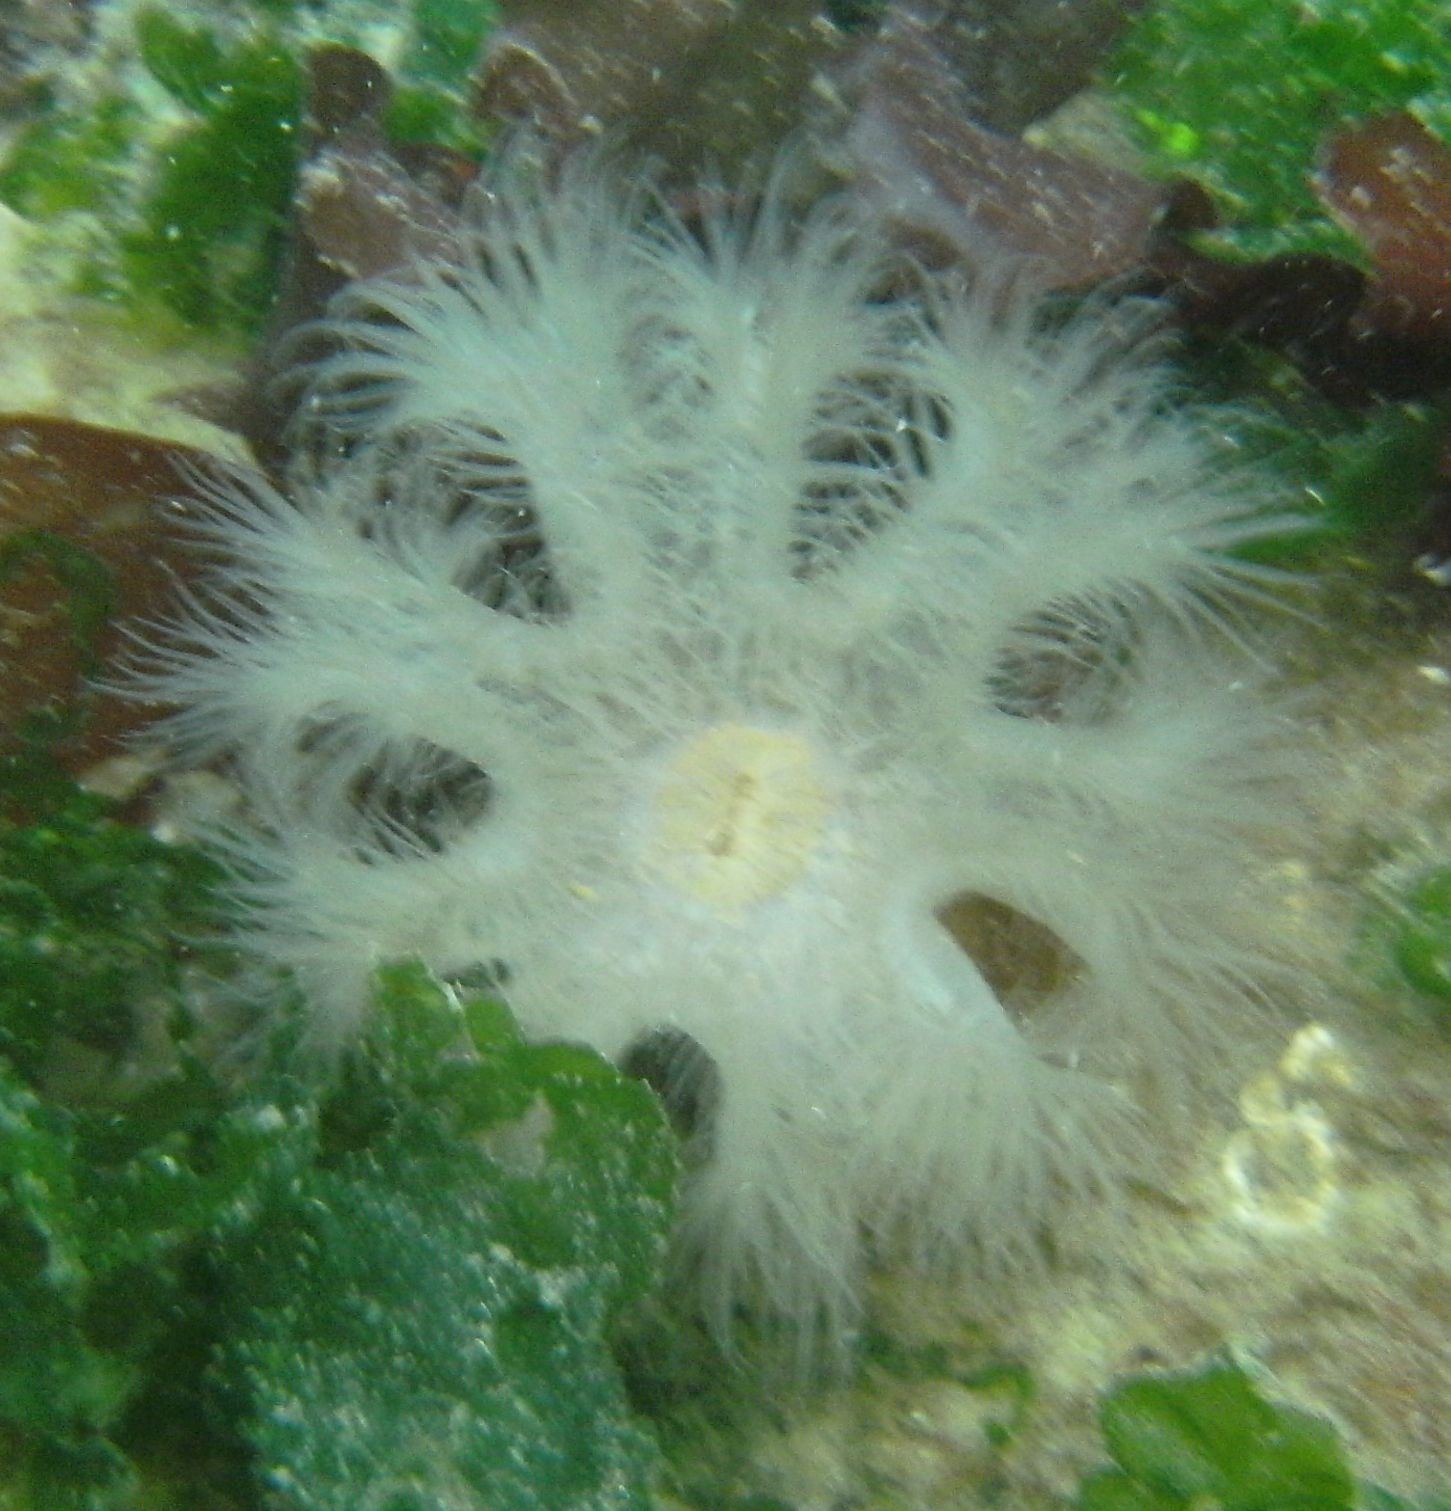 Small anemone with oral lobes